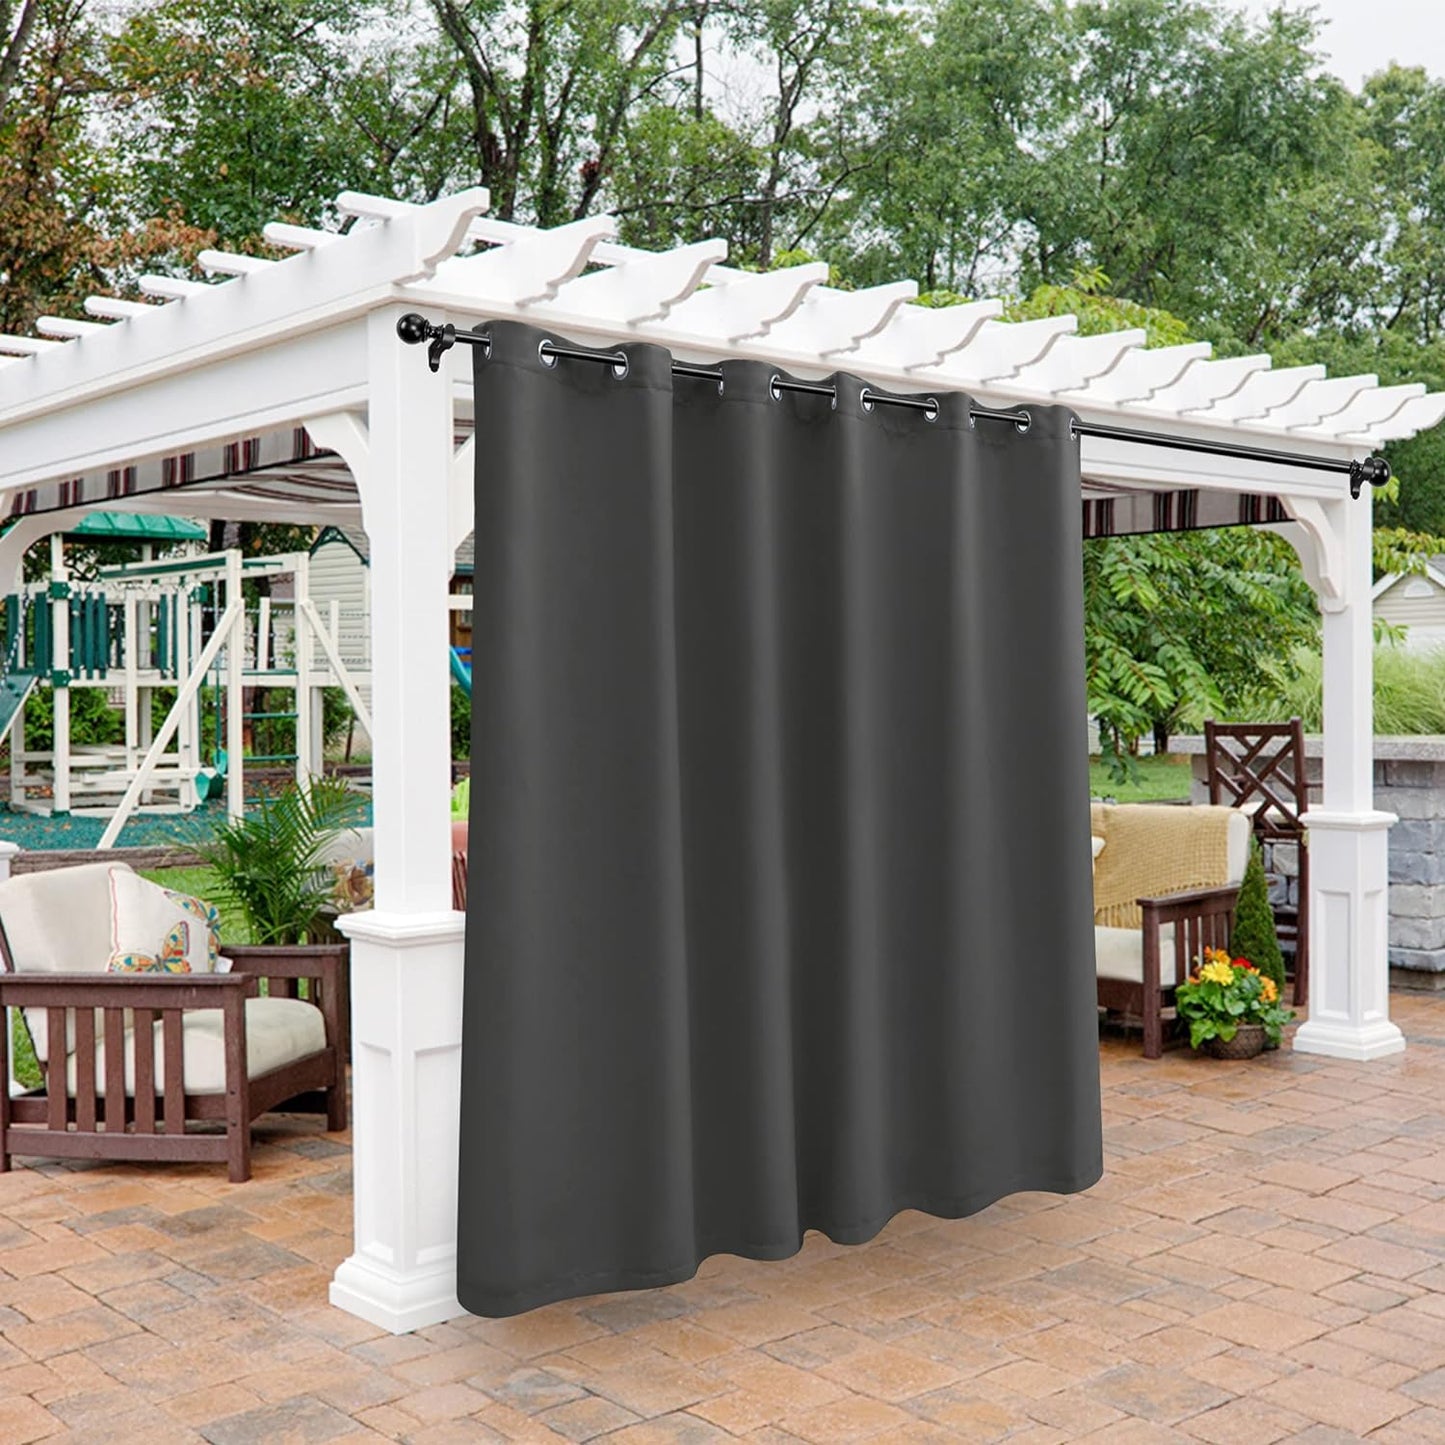 BONZER Outdoor Curtains for Patio Waterproof - Light Blocking Weather Resistant Privacy Grommet Blackout Curtains for Gazebo, Porch, Pergola, Cabana, Deck, Sunroom, 1 Panel, 52W X 84L Inch, Silver  BONZER Dark Grey 100W X 120 Inch 